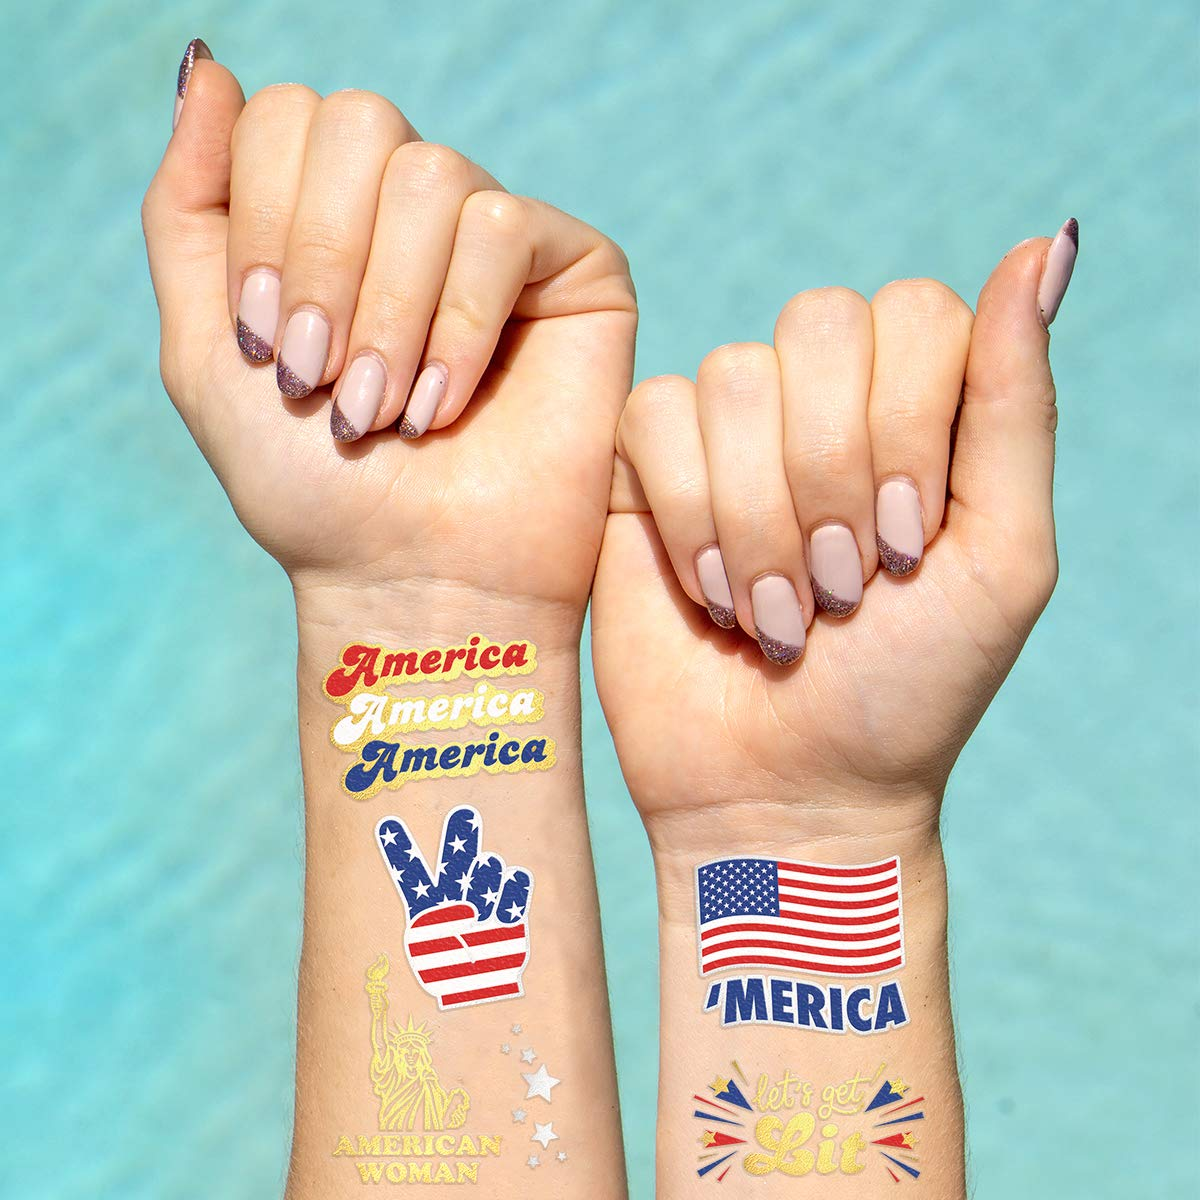 Xo, Fetti Fourth of July Party Supplies Temporary Tattoos - 34 Glitter Styles | American Flag, 4Th of July